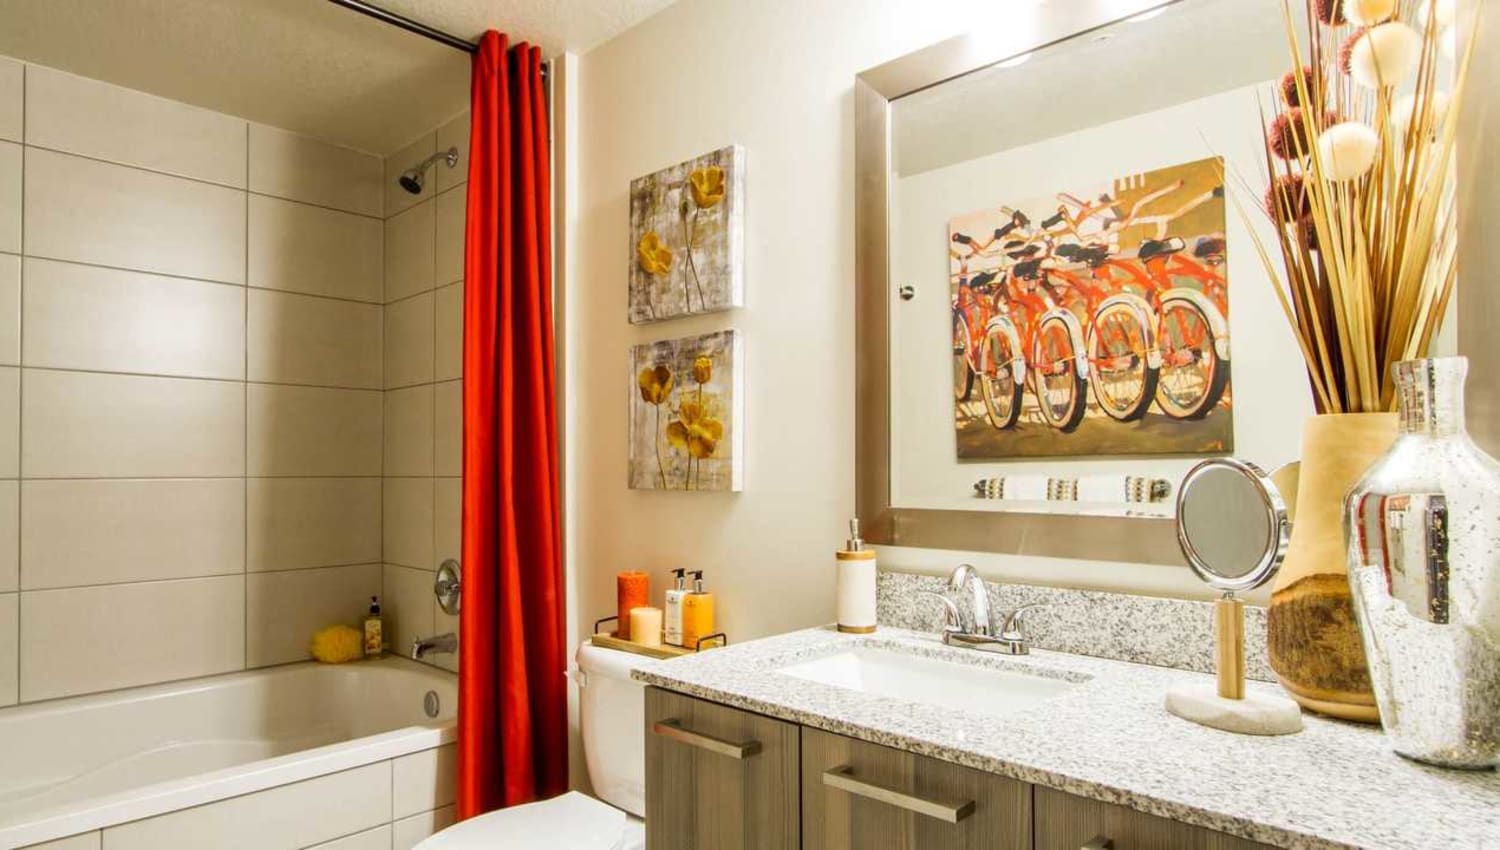 Bathroom with granite countertops, designer cabinetry, and a tiled shower/tub at Luzano in Pompano Beach, Florida